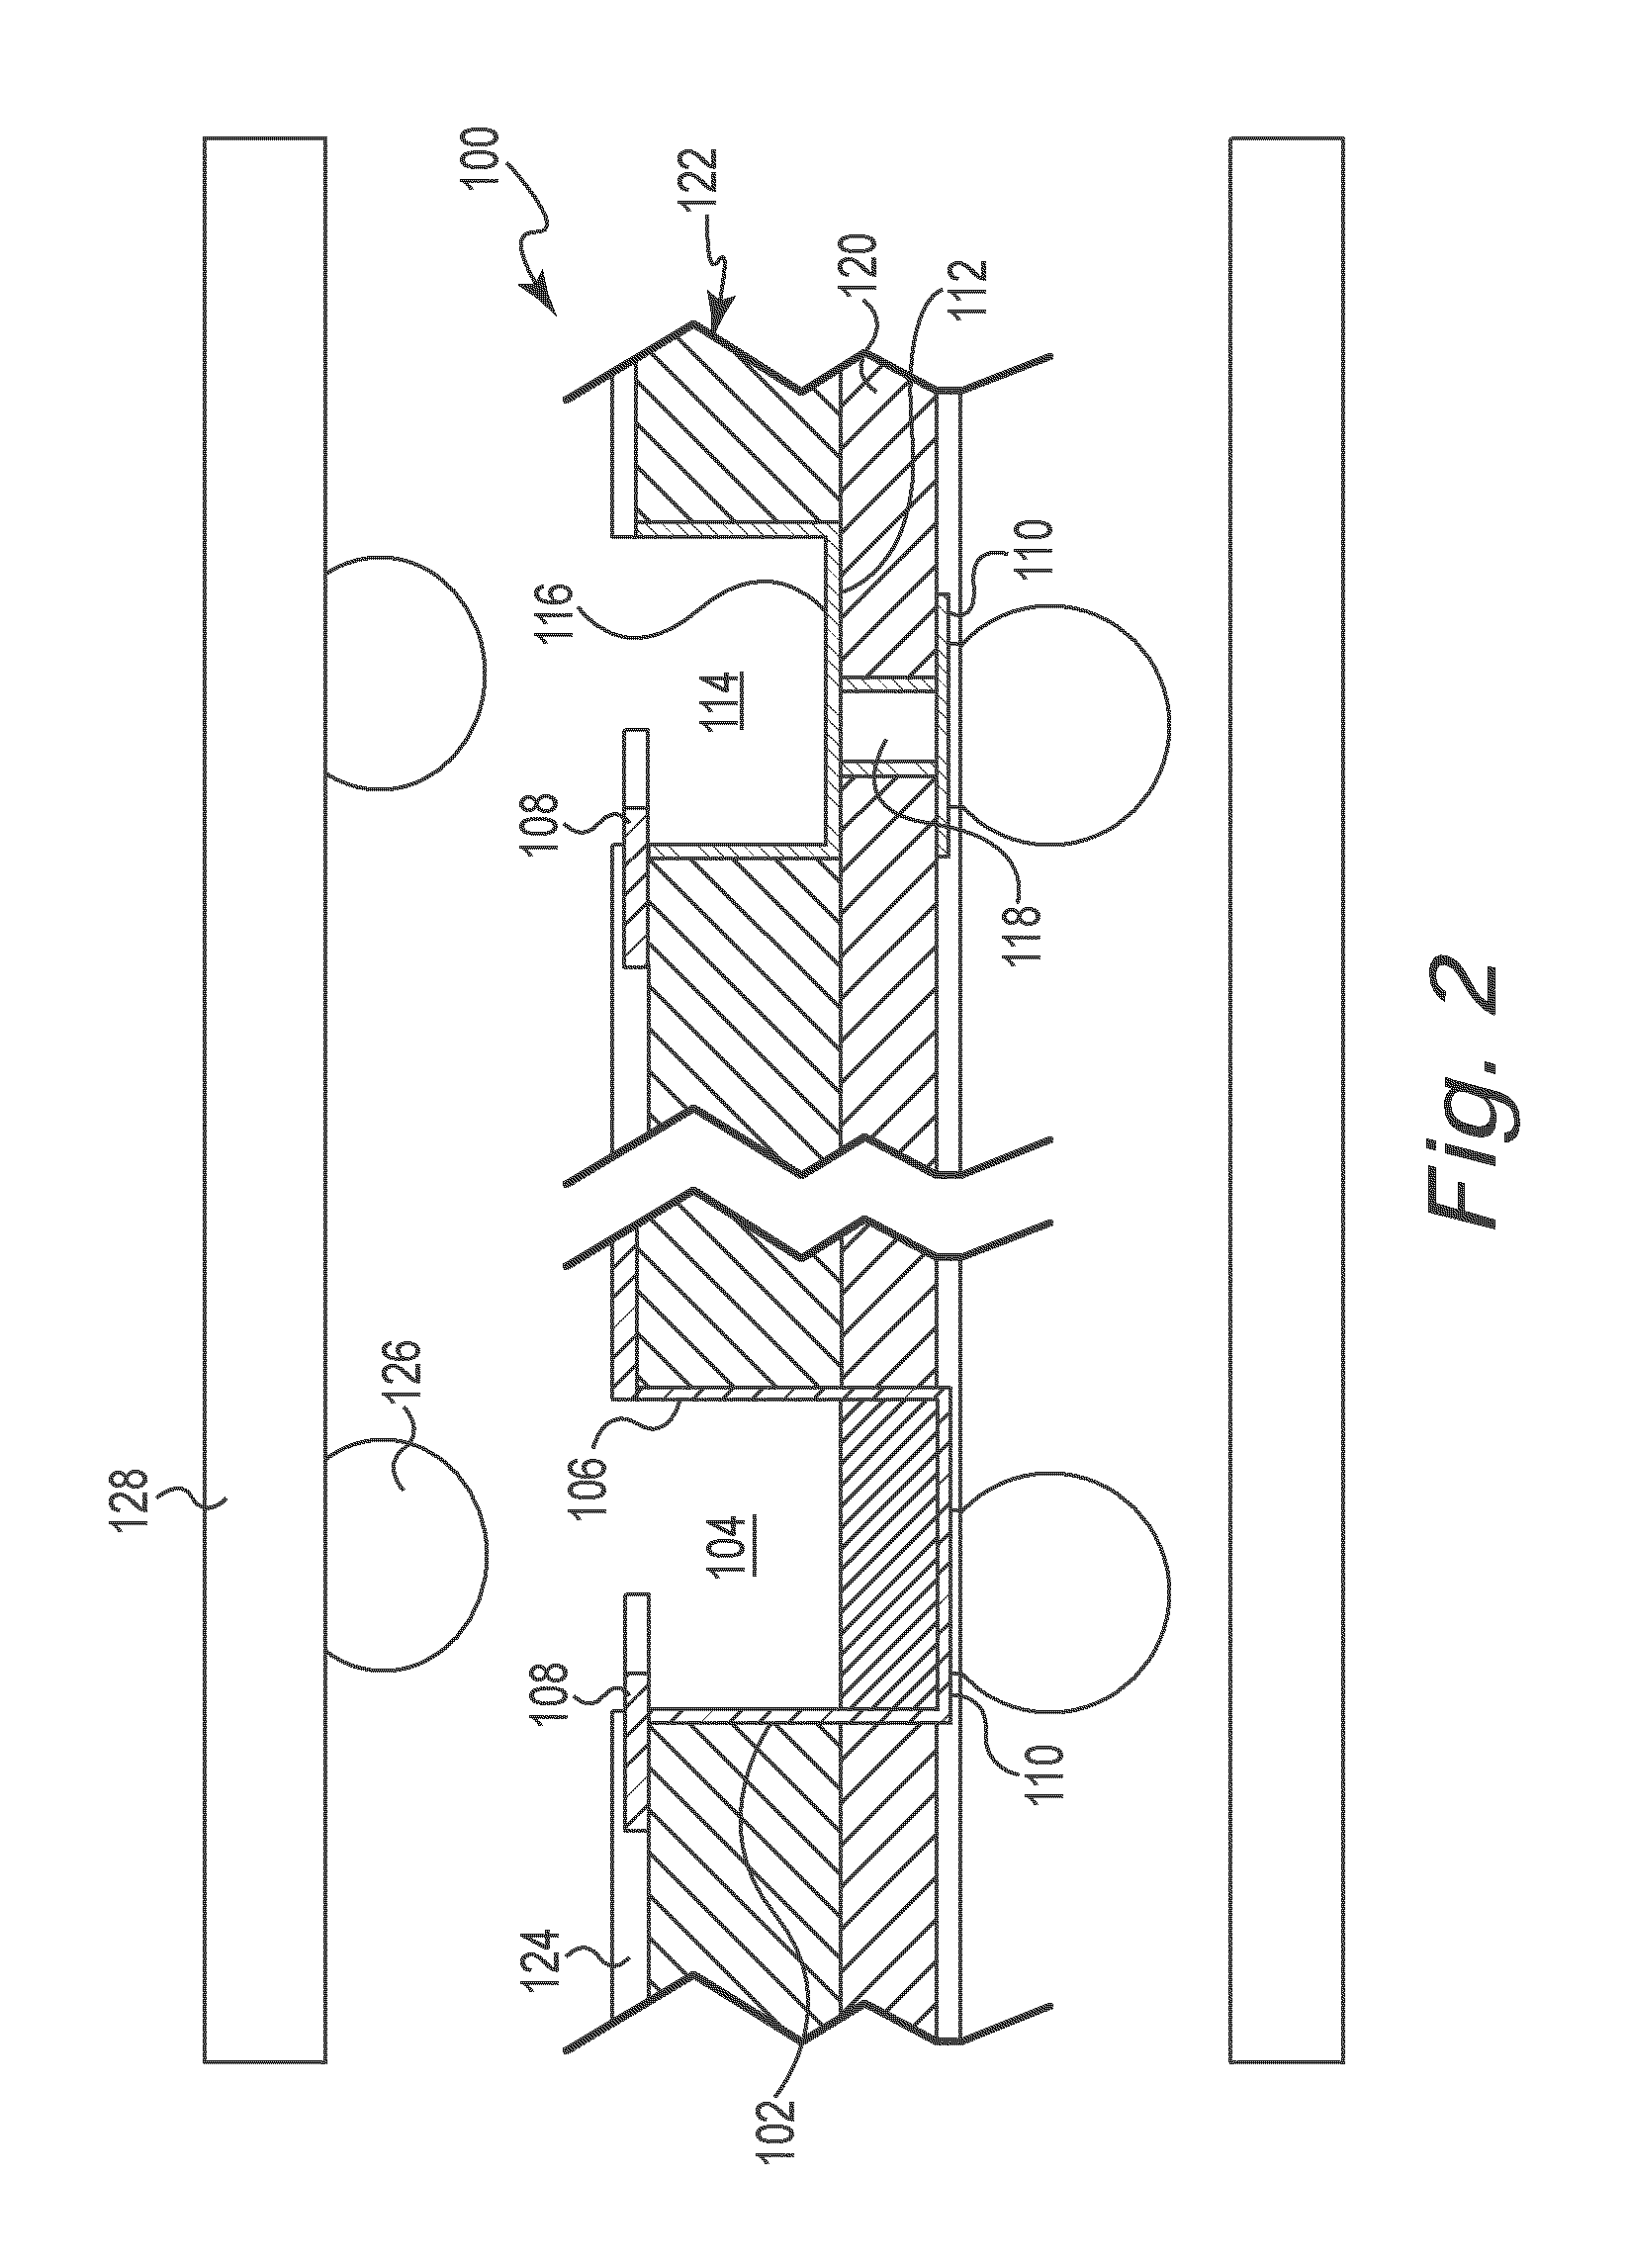 High performance surface mount electrical interconnect with external biased normal force loading